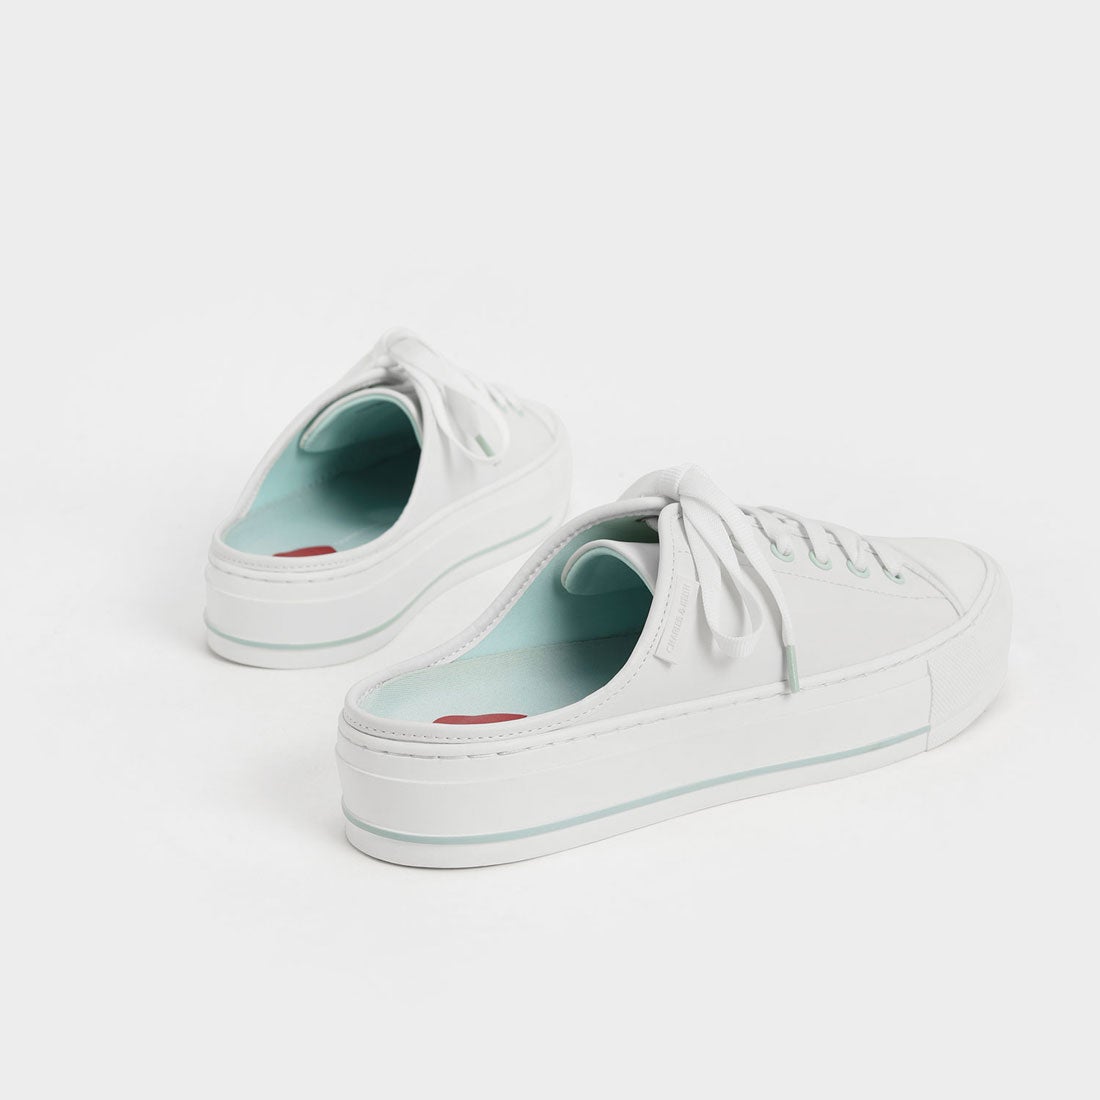 【2022 SPRING】ハートモチーフ レースアップスニーカーミュール / Heart-Motif Lace-Up Sneaker Mules  （MintGreen